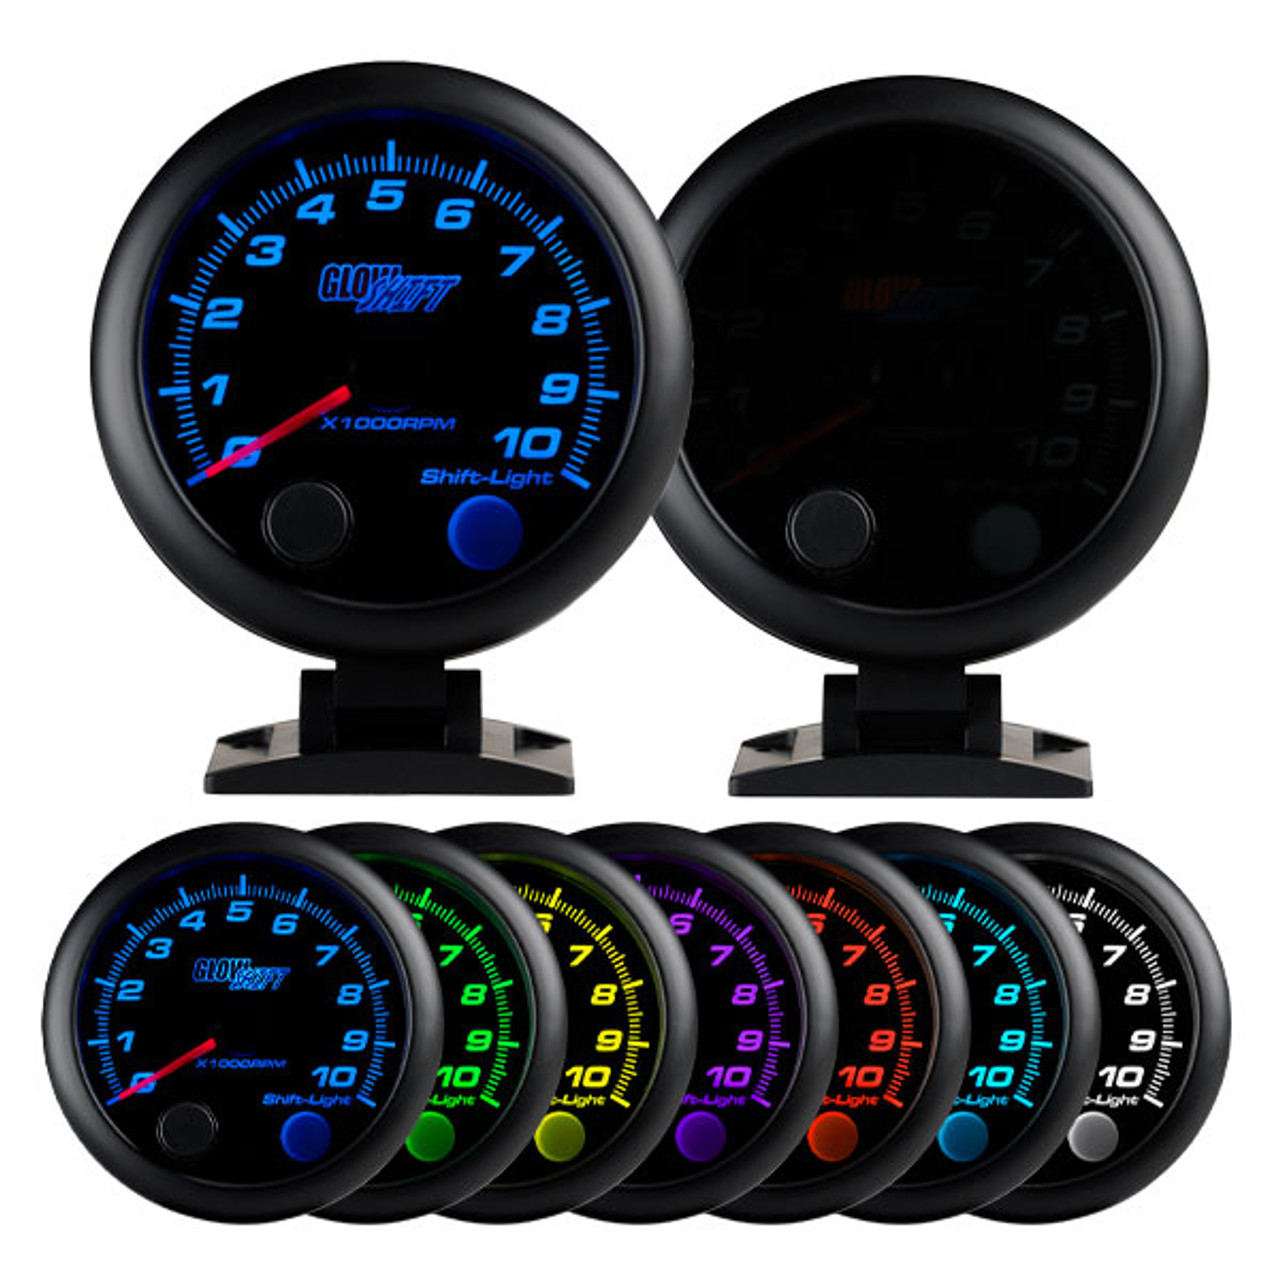 GlowShift Tinted Color 3-3/4” Tachometer w/ Shift Light